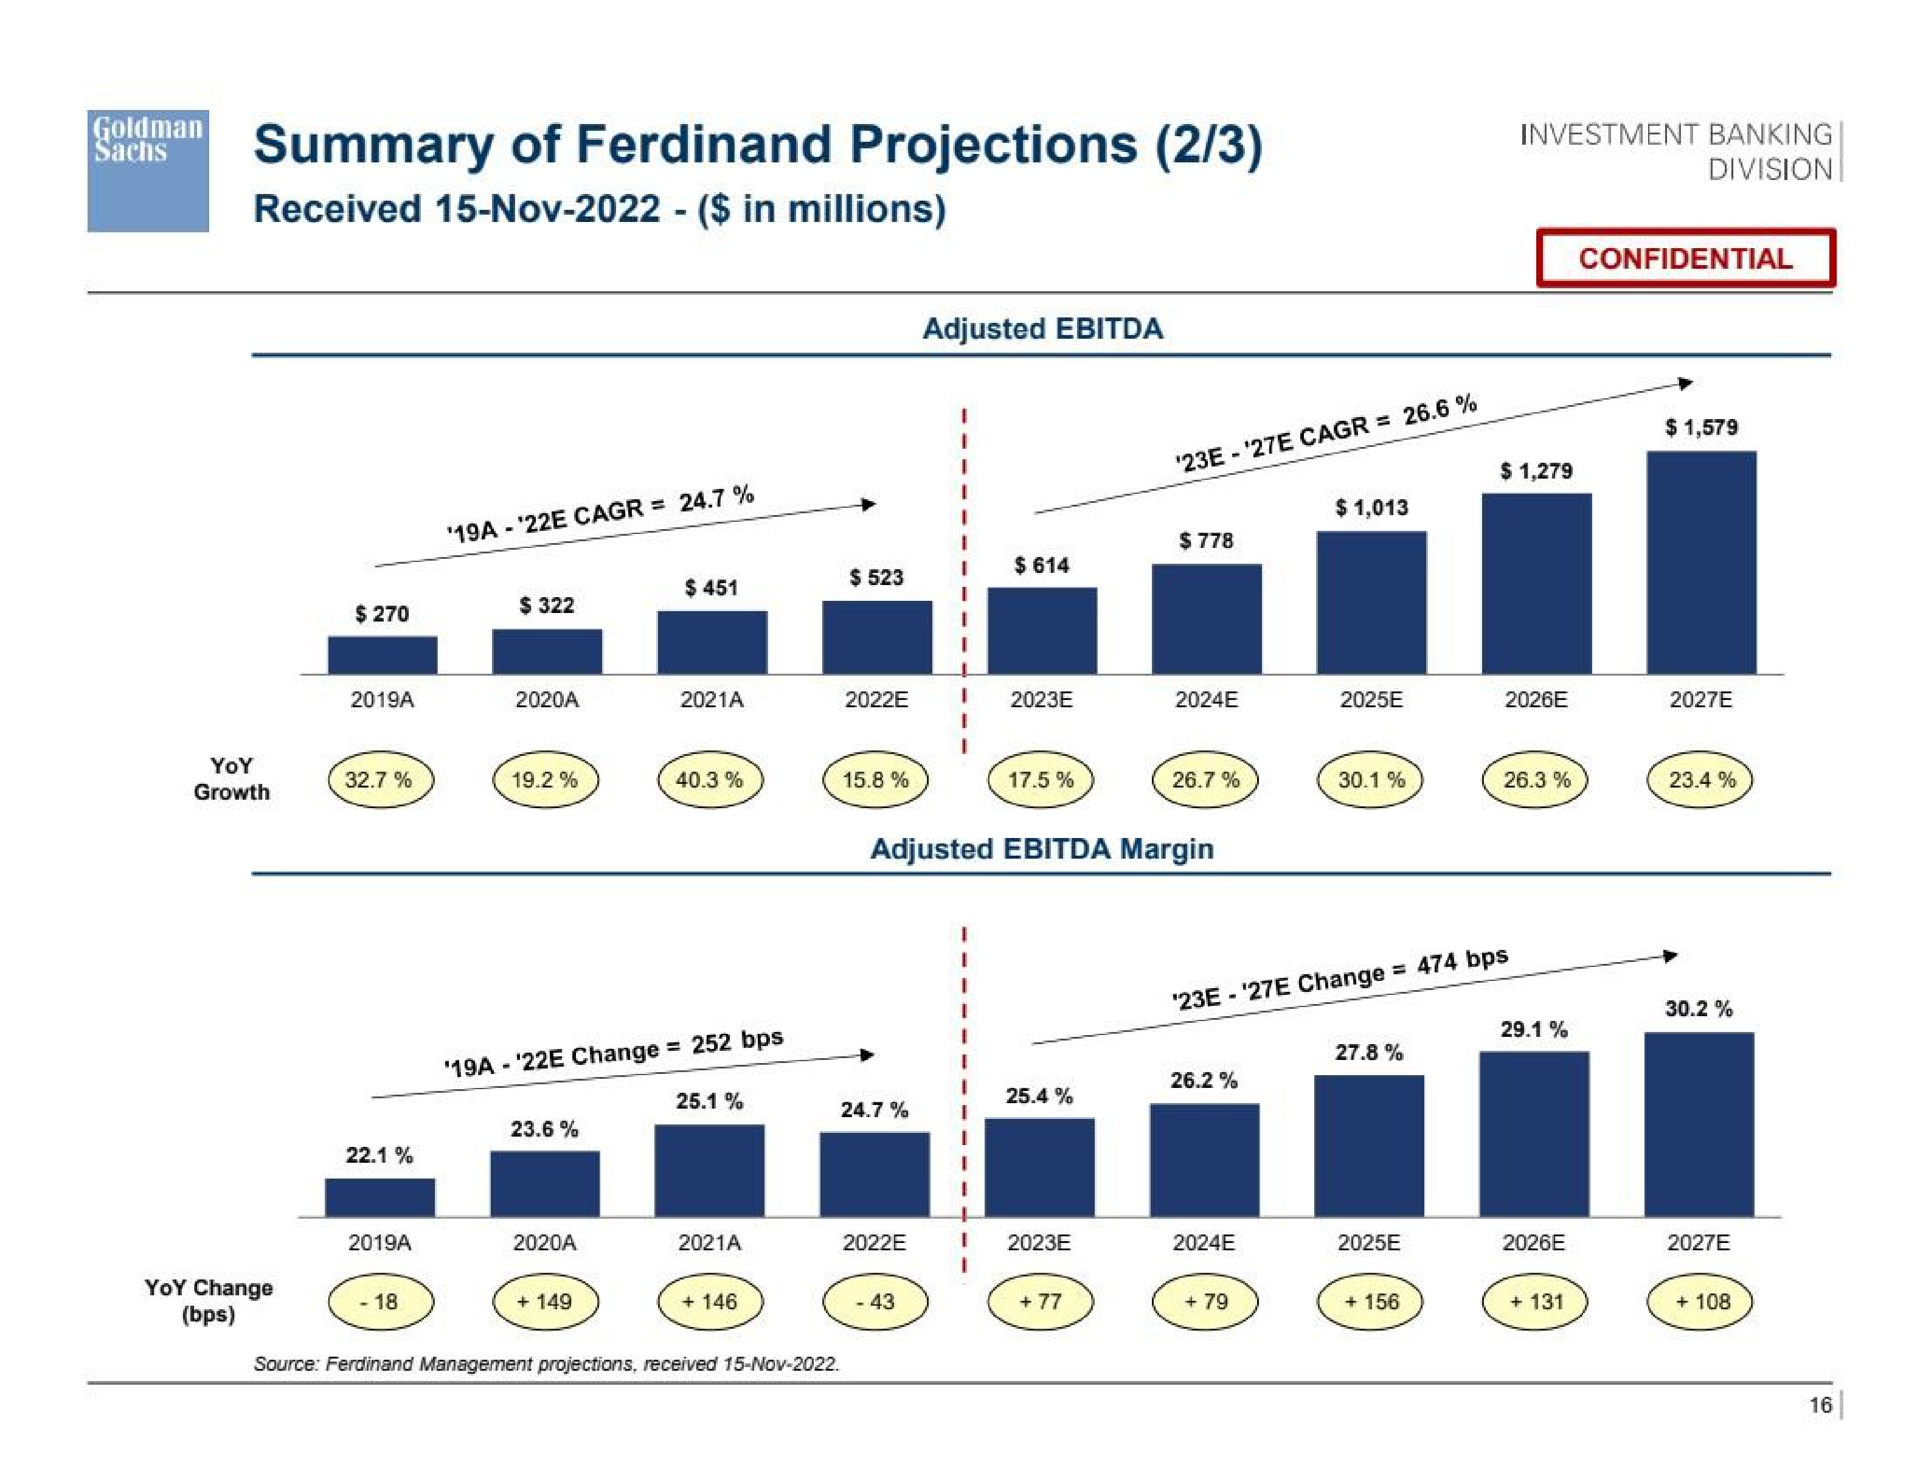 summary of projections investment banking | Goldman Sachs